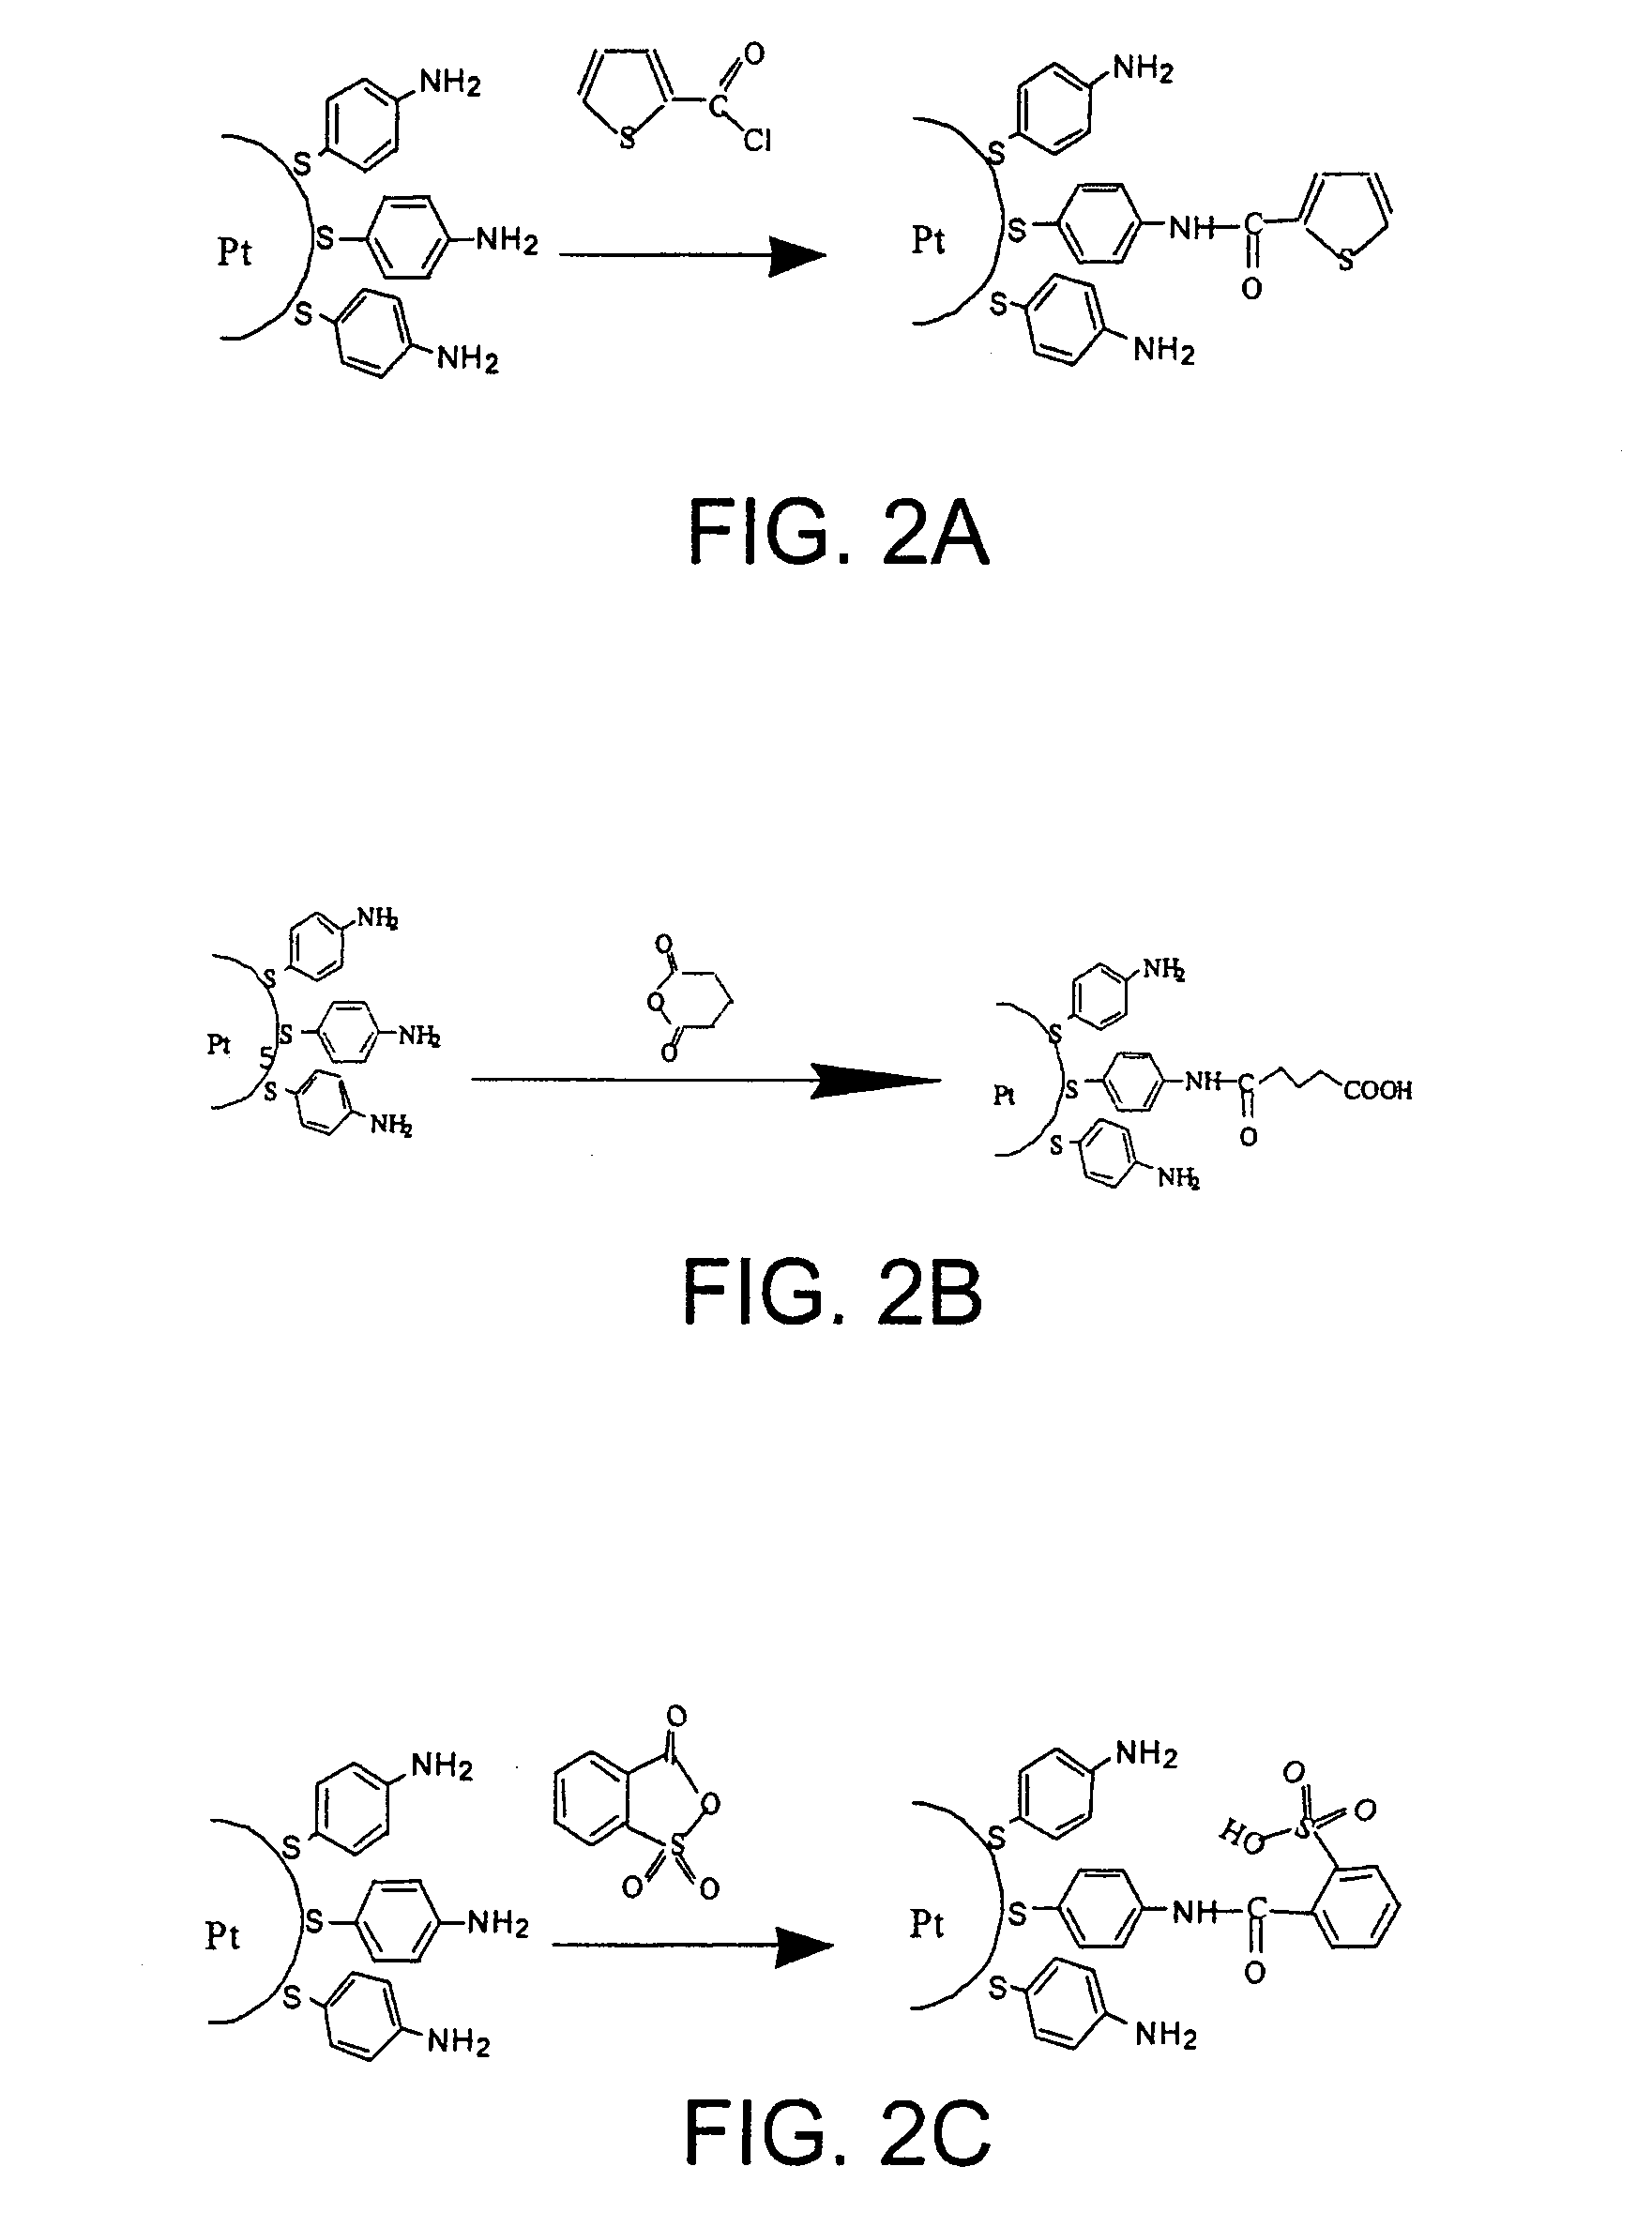 Nanoparticles comprising a metal core and an organic double coating useful as catalysts and device containing the nanoparticles